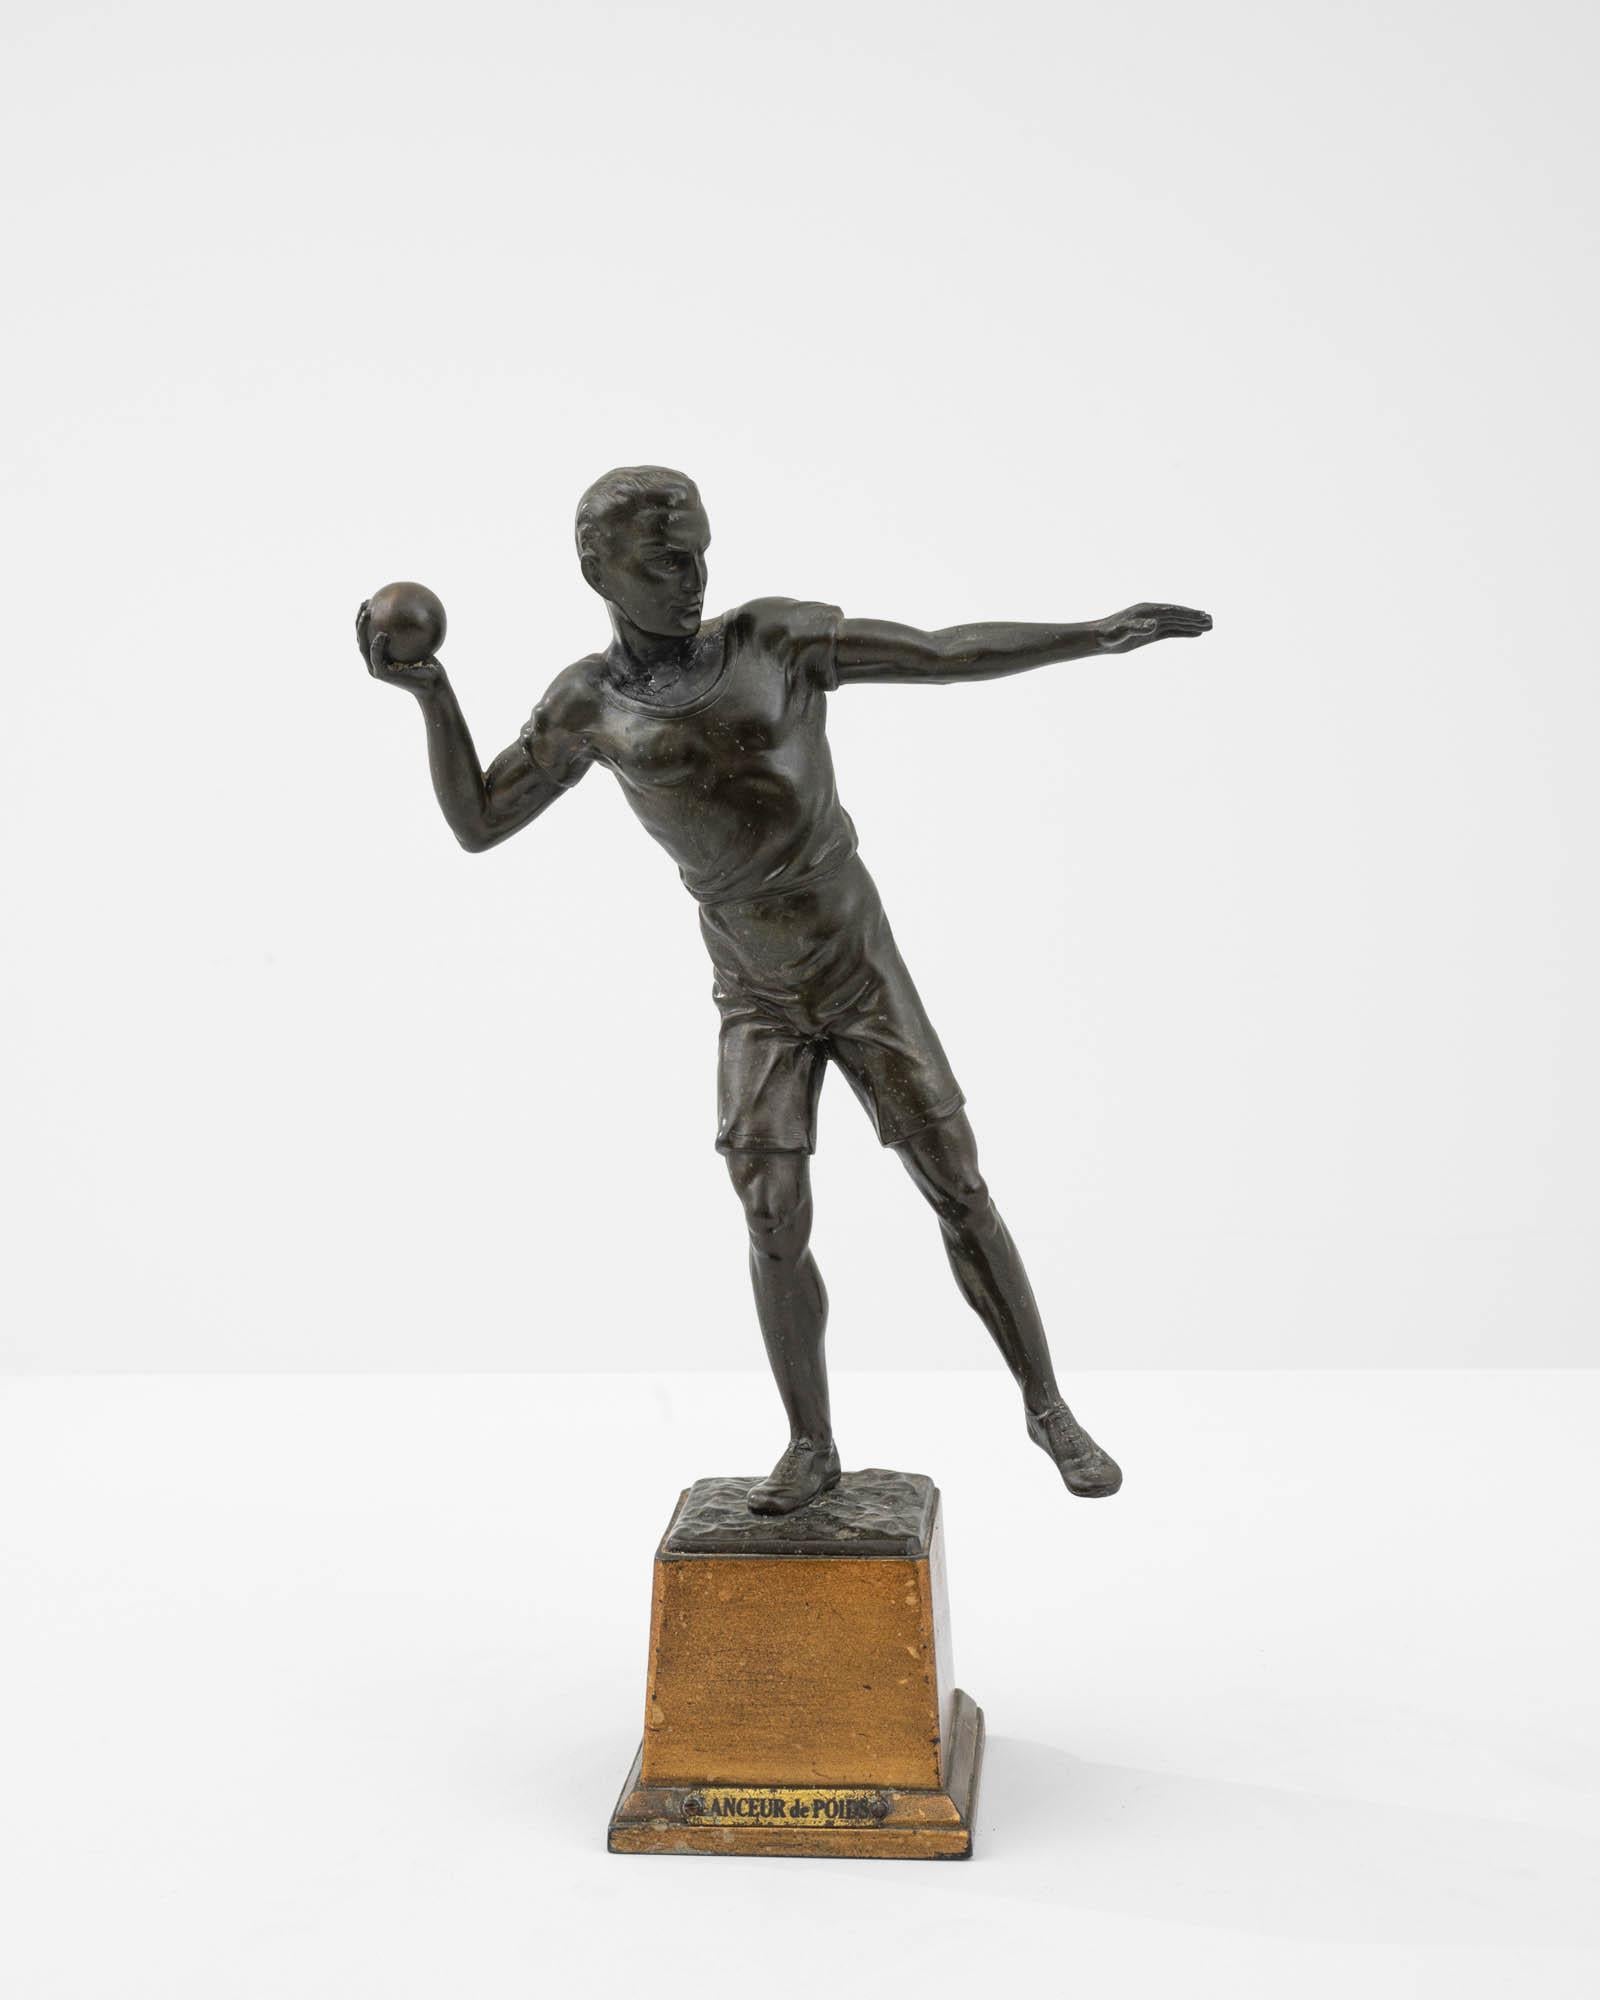 Sport has pervaded art as a motif, and sculpture specifically, since ancient times. This take on the classical motif renders a distinctly 20th century French version. Cast in bronze, an olympian figure tilts sharply to one side, capturing the moment